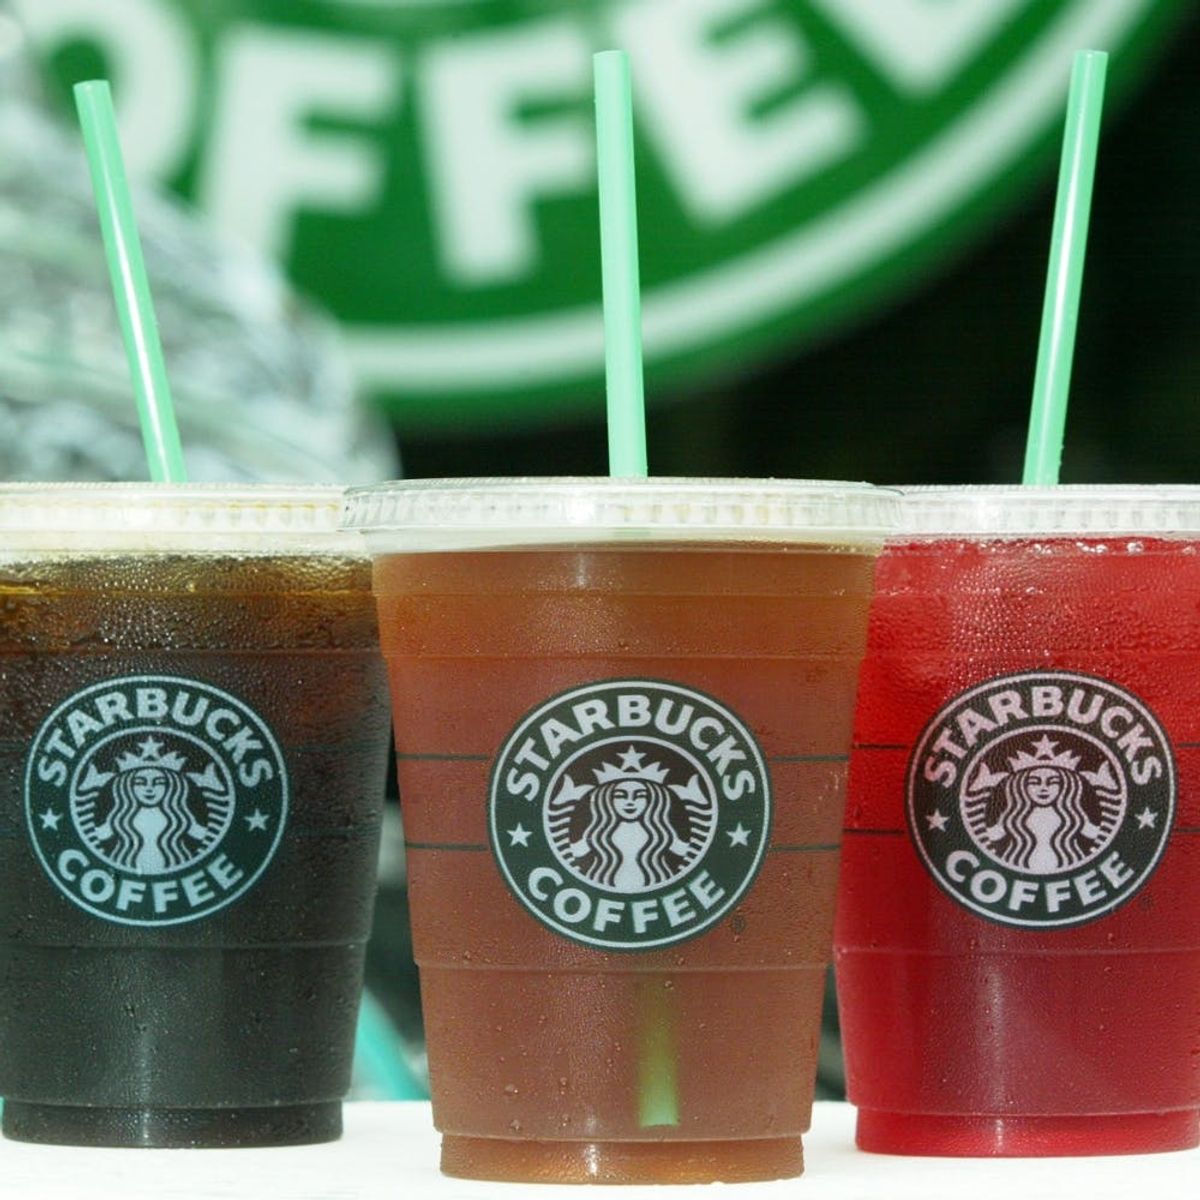 Here’s Why You May Want to Think Twice About Ordering Iced Drinks at Starbucks